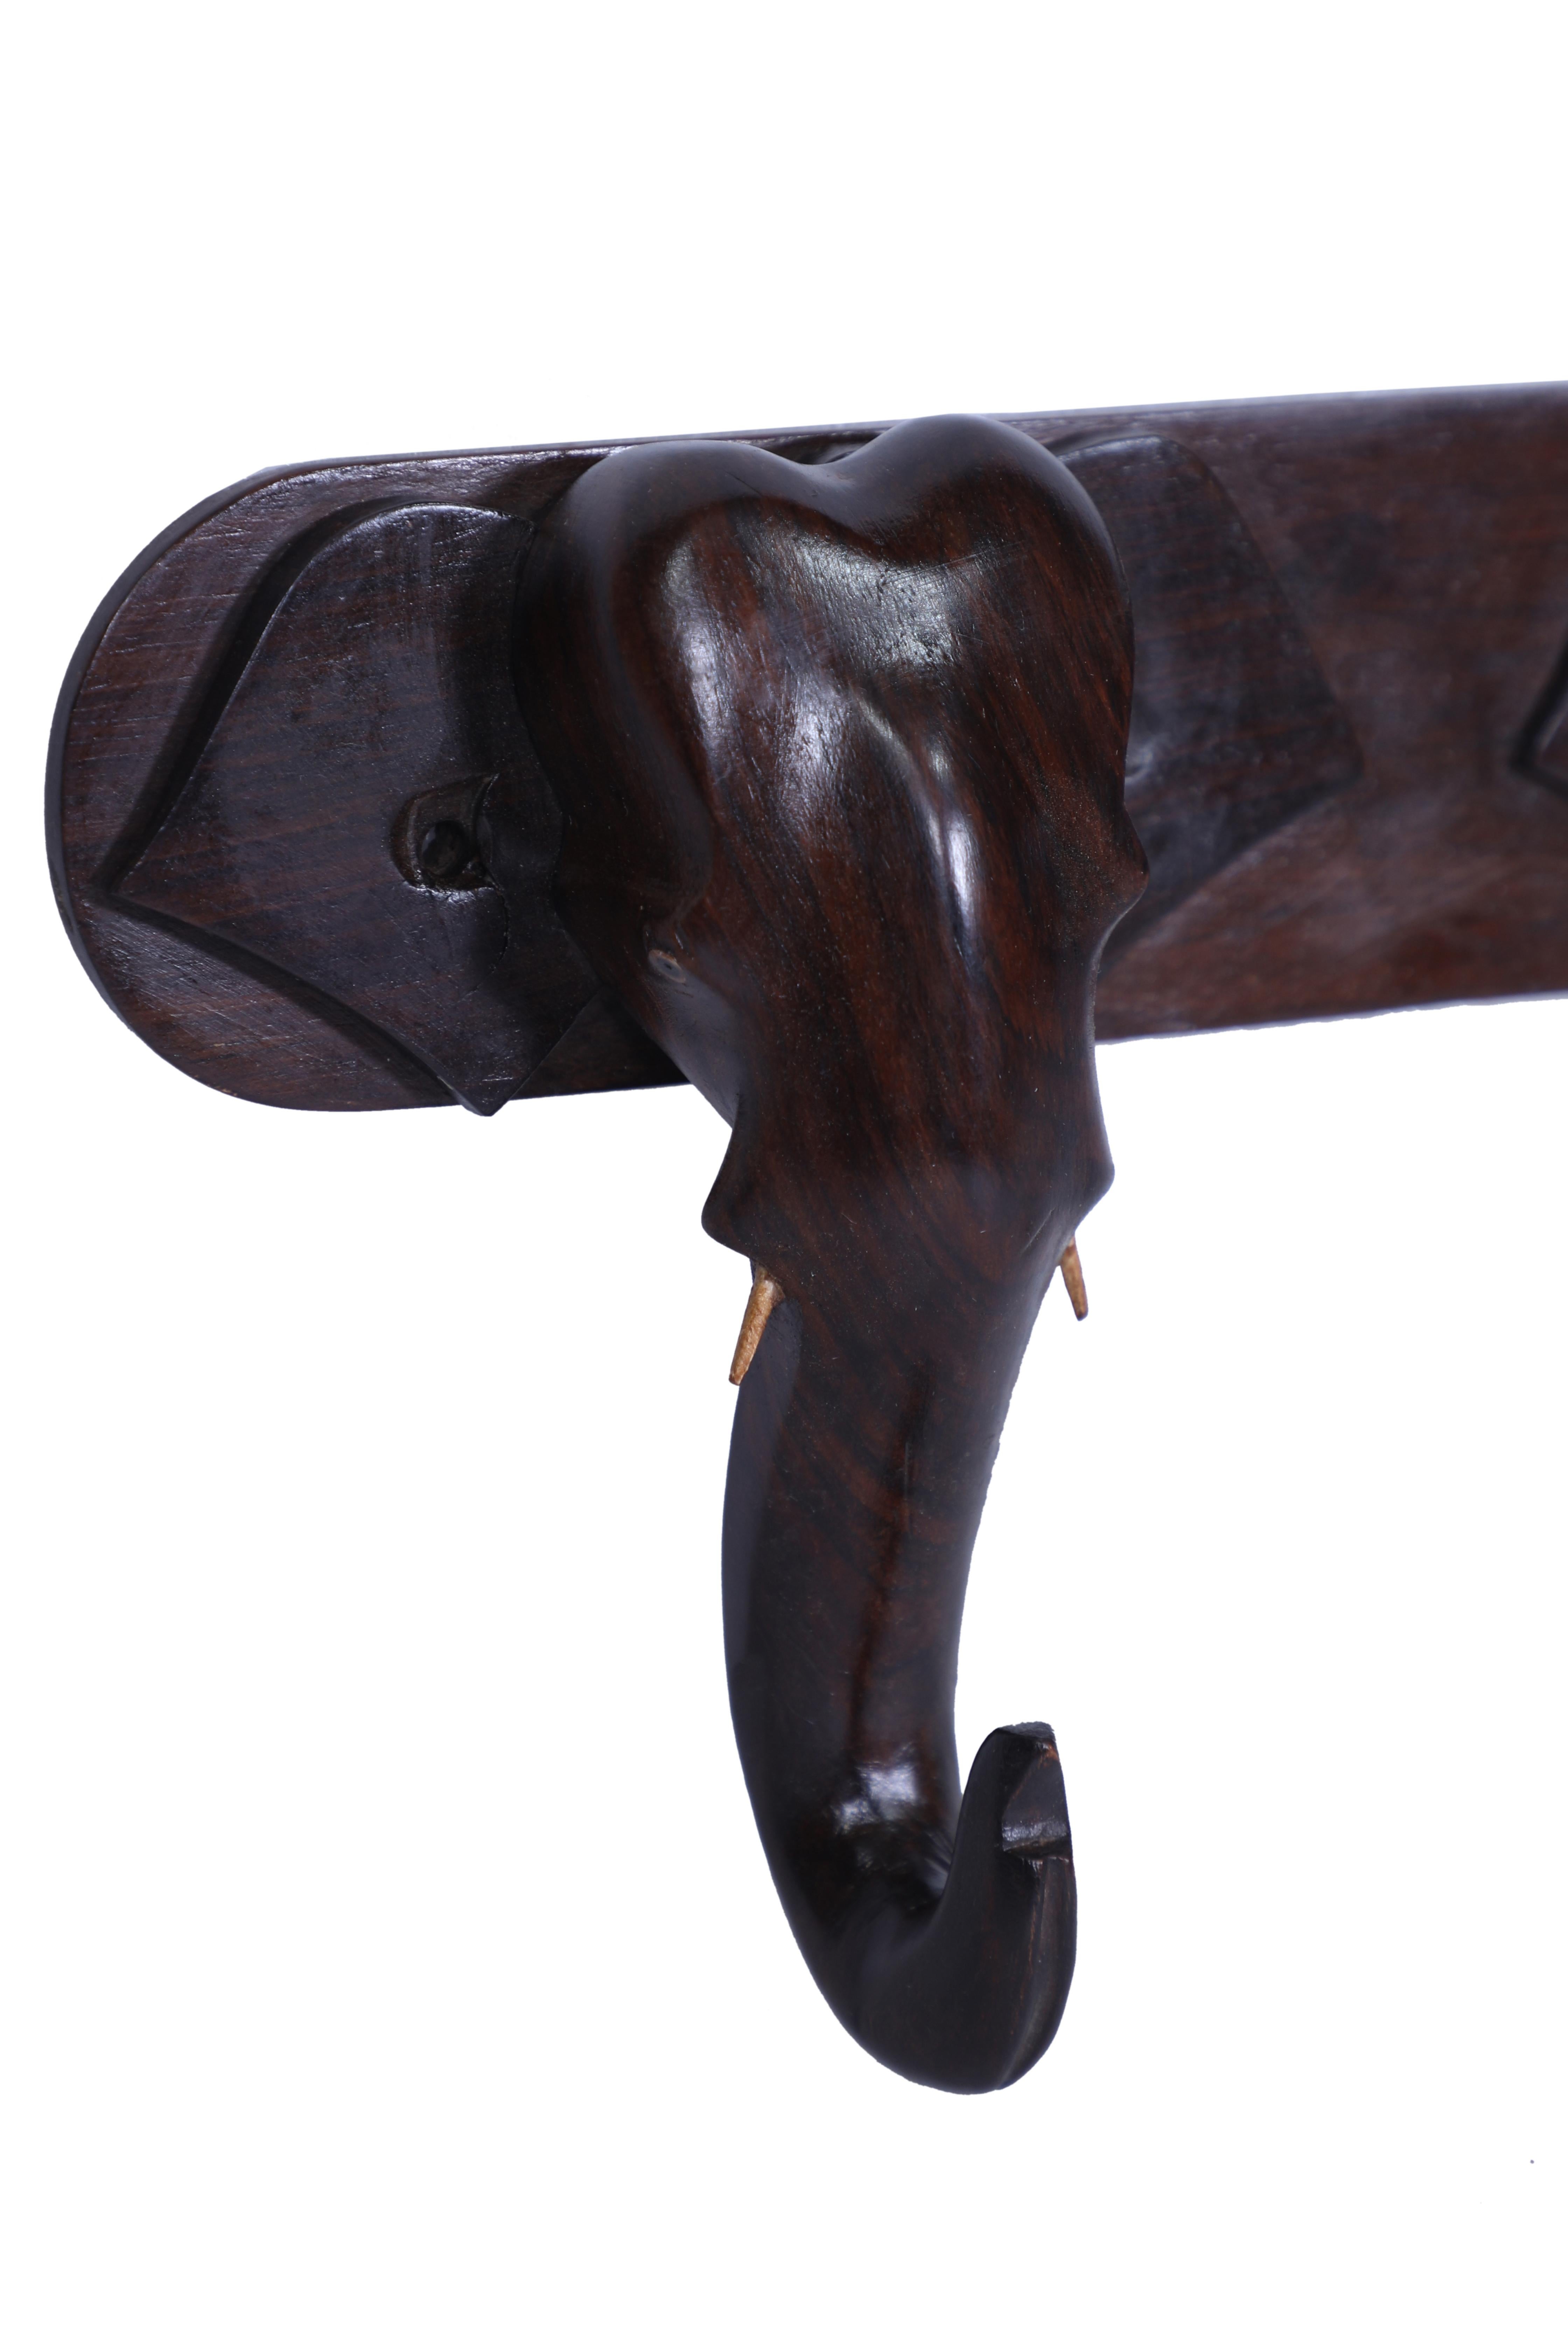 20th Century Elephant Head Rosewood Wall Hook Coat or Hat Rack For Sale